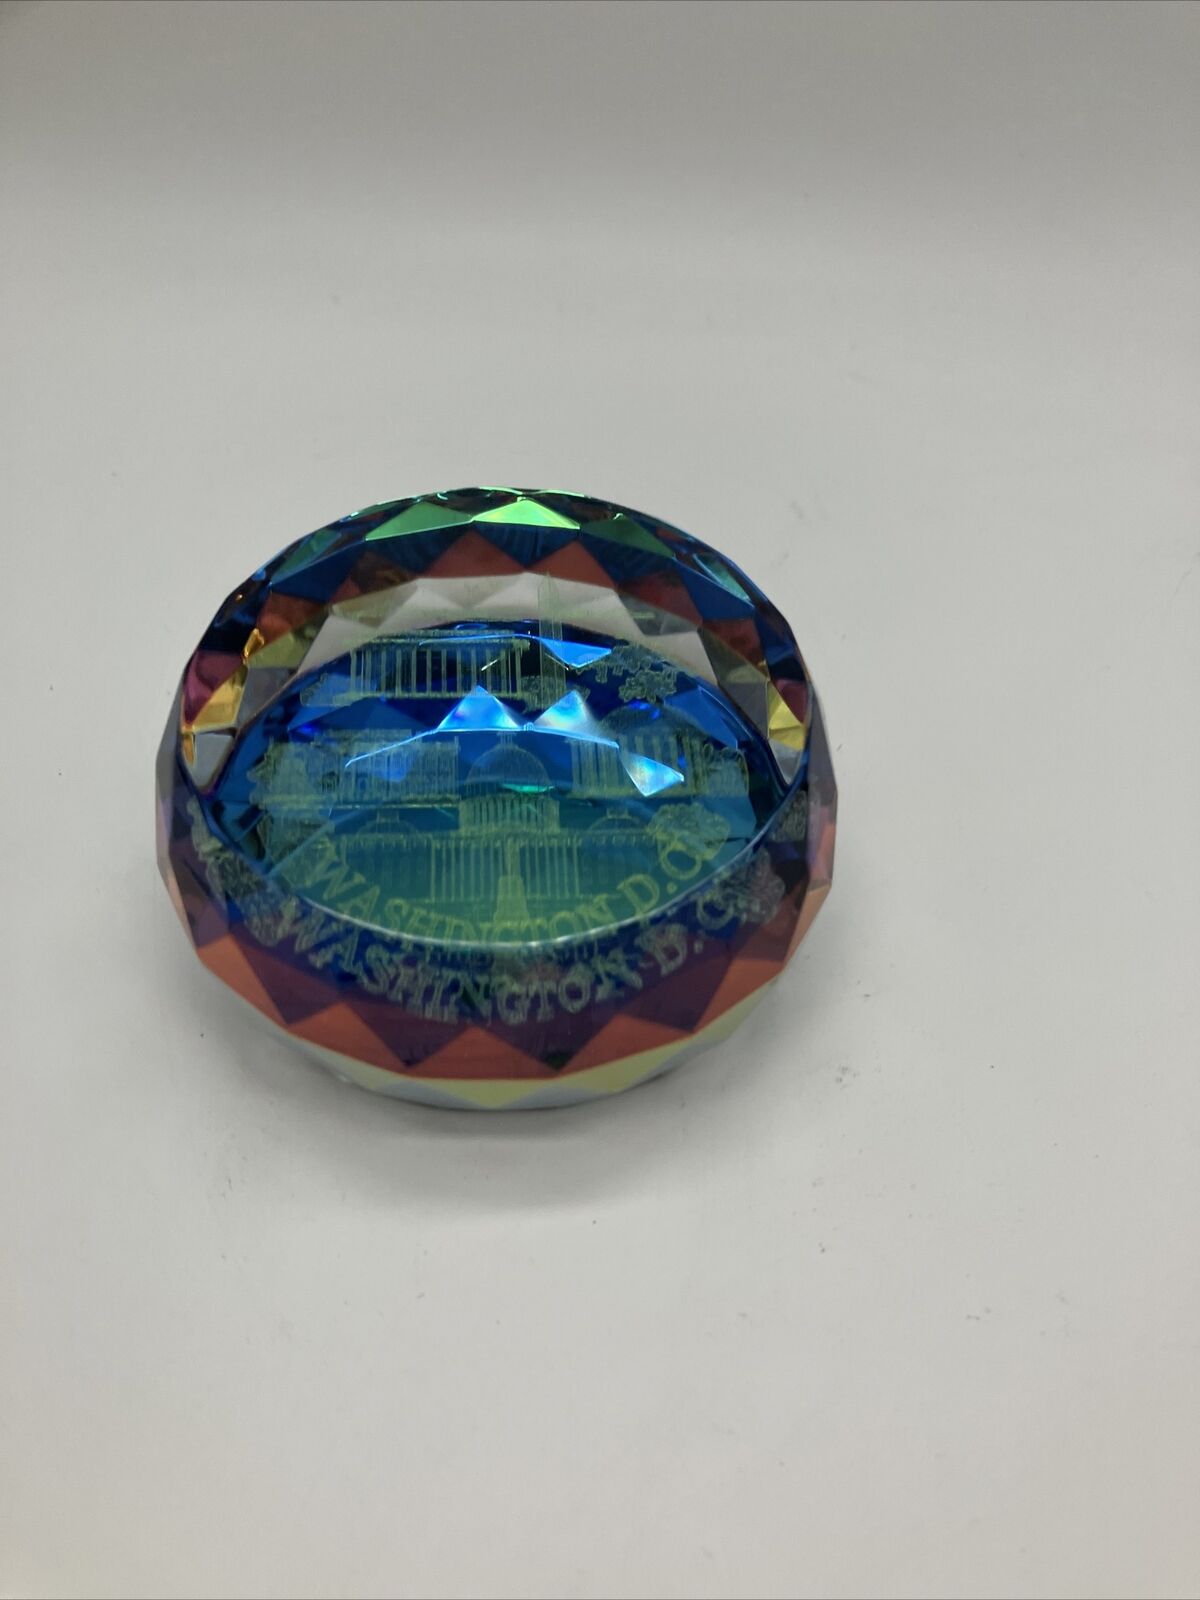 GREAT SEAL OF THE UNITED STATES HOLOGRAPHIC GLASS PRISM PAPERWEIGHT